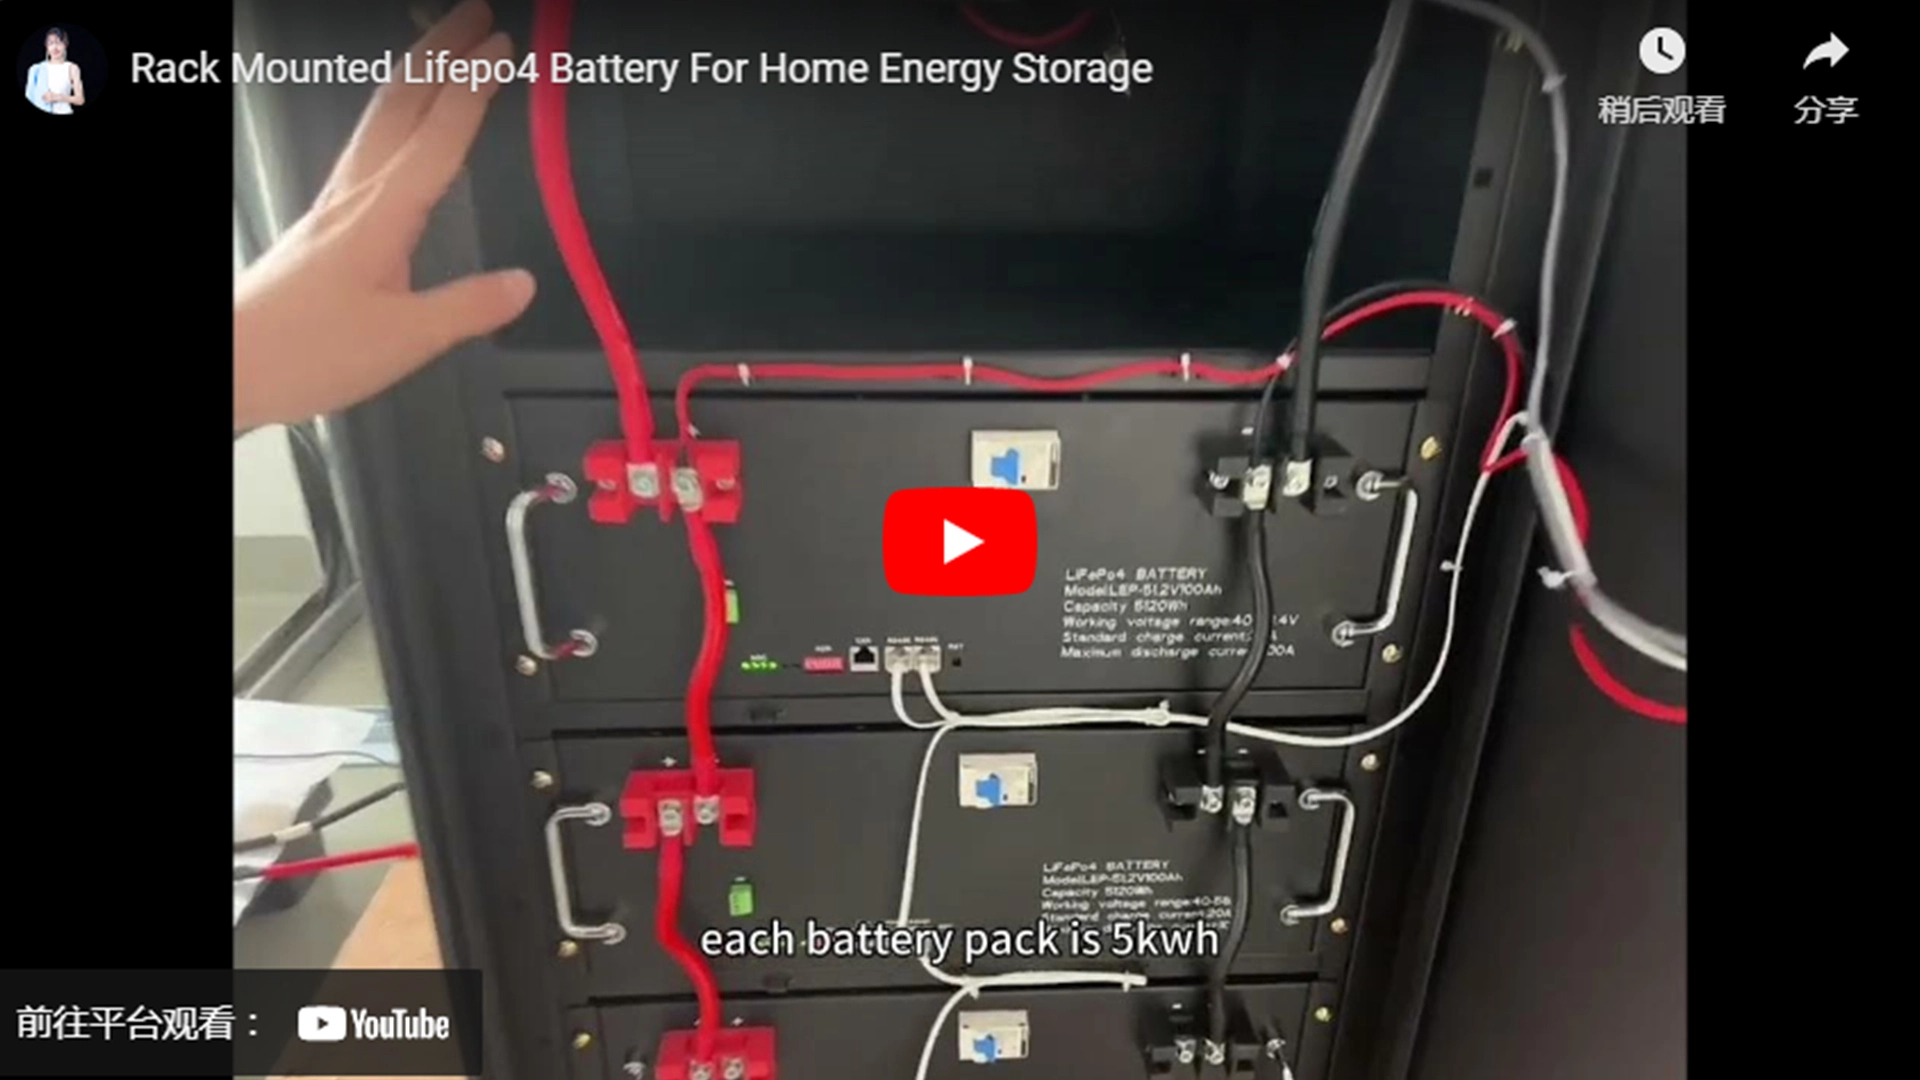 Rack Mounted Lifepo4 Battery For Home Energy Storage